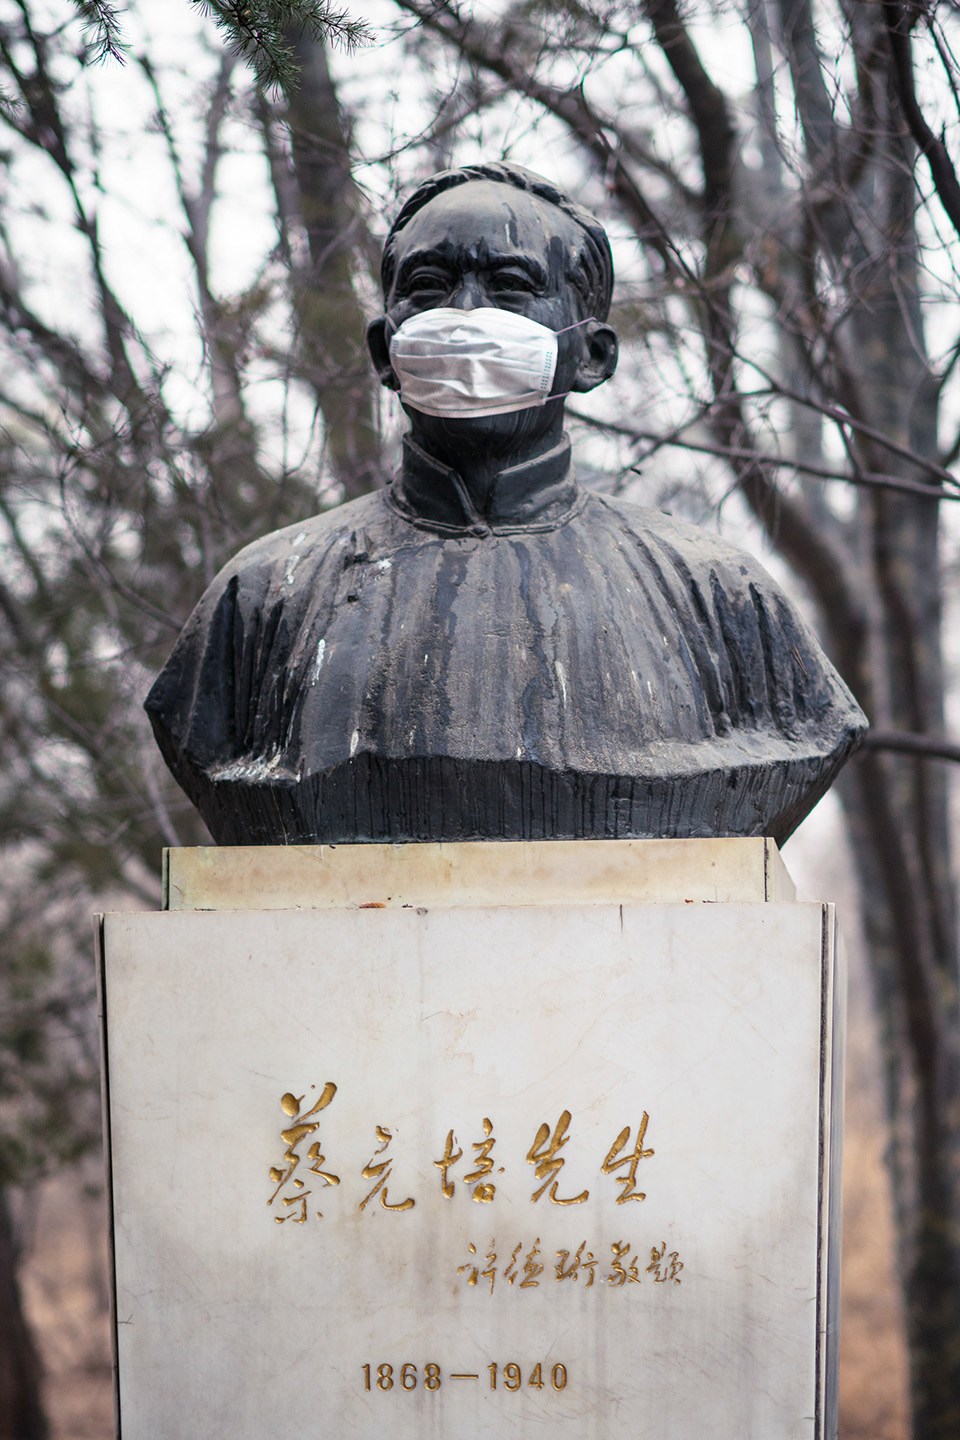 beijing university statues are masked for air pollution